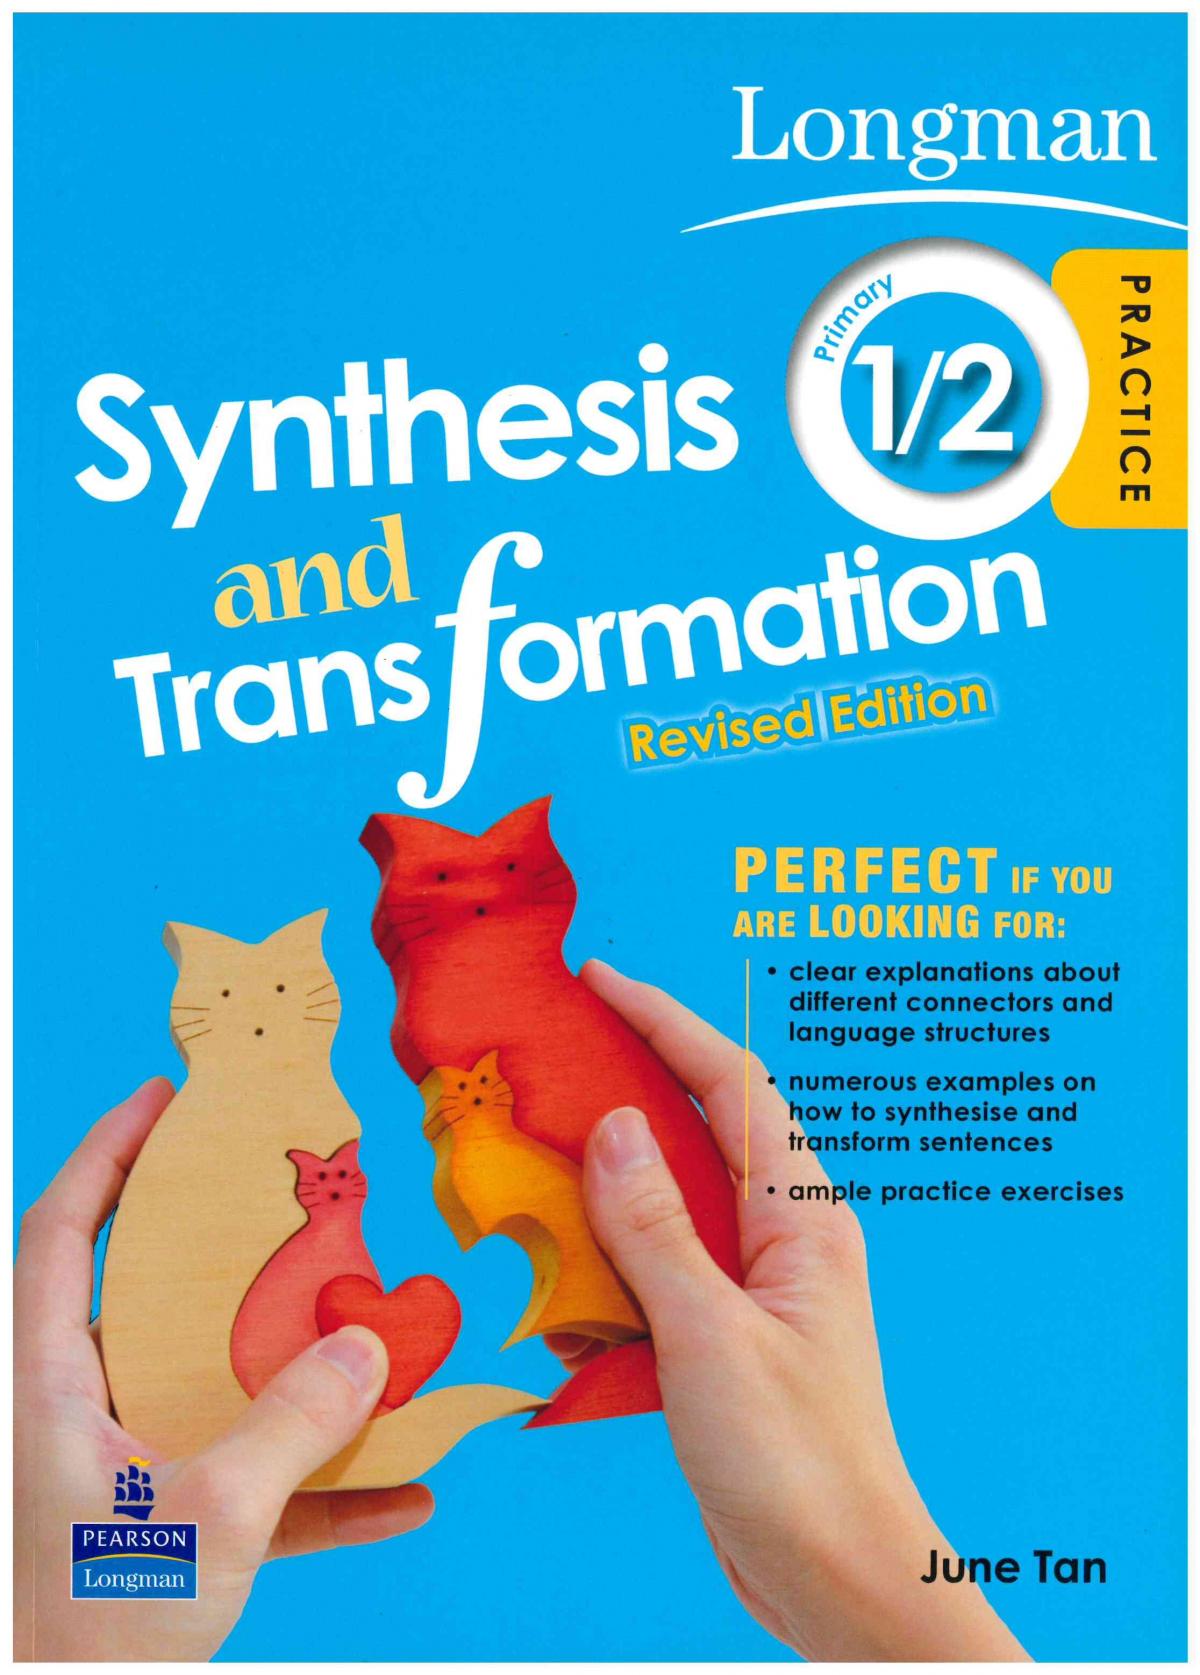 Synthesis and transformation Primary 1/2 Revised Edition